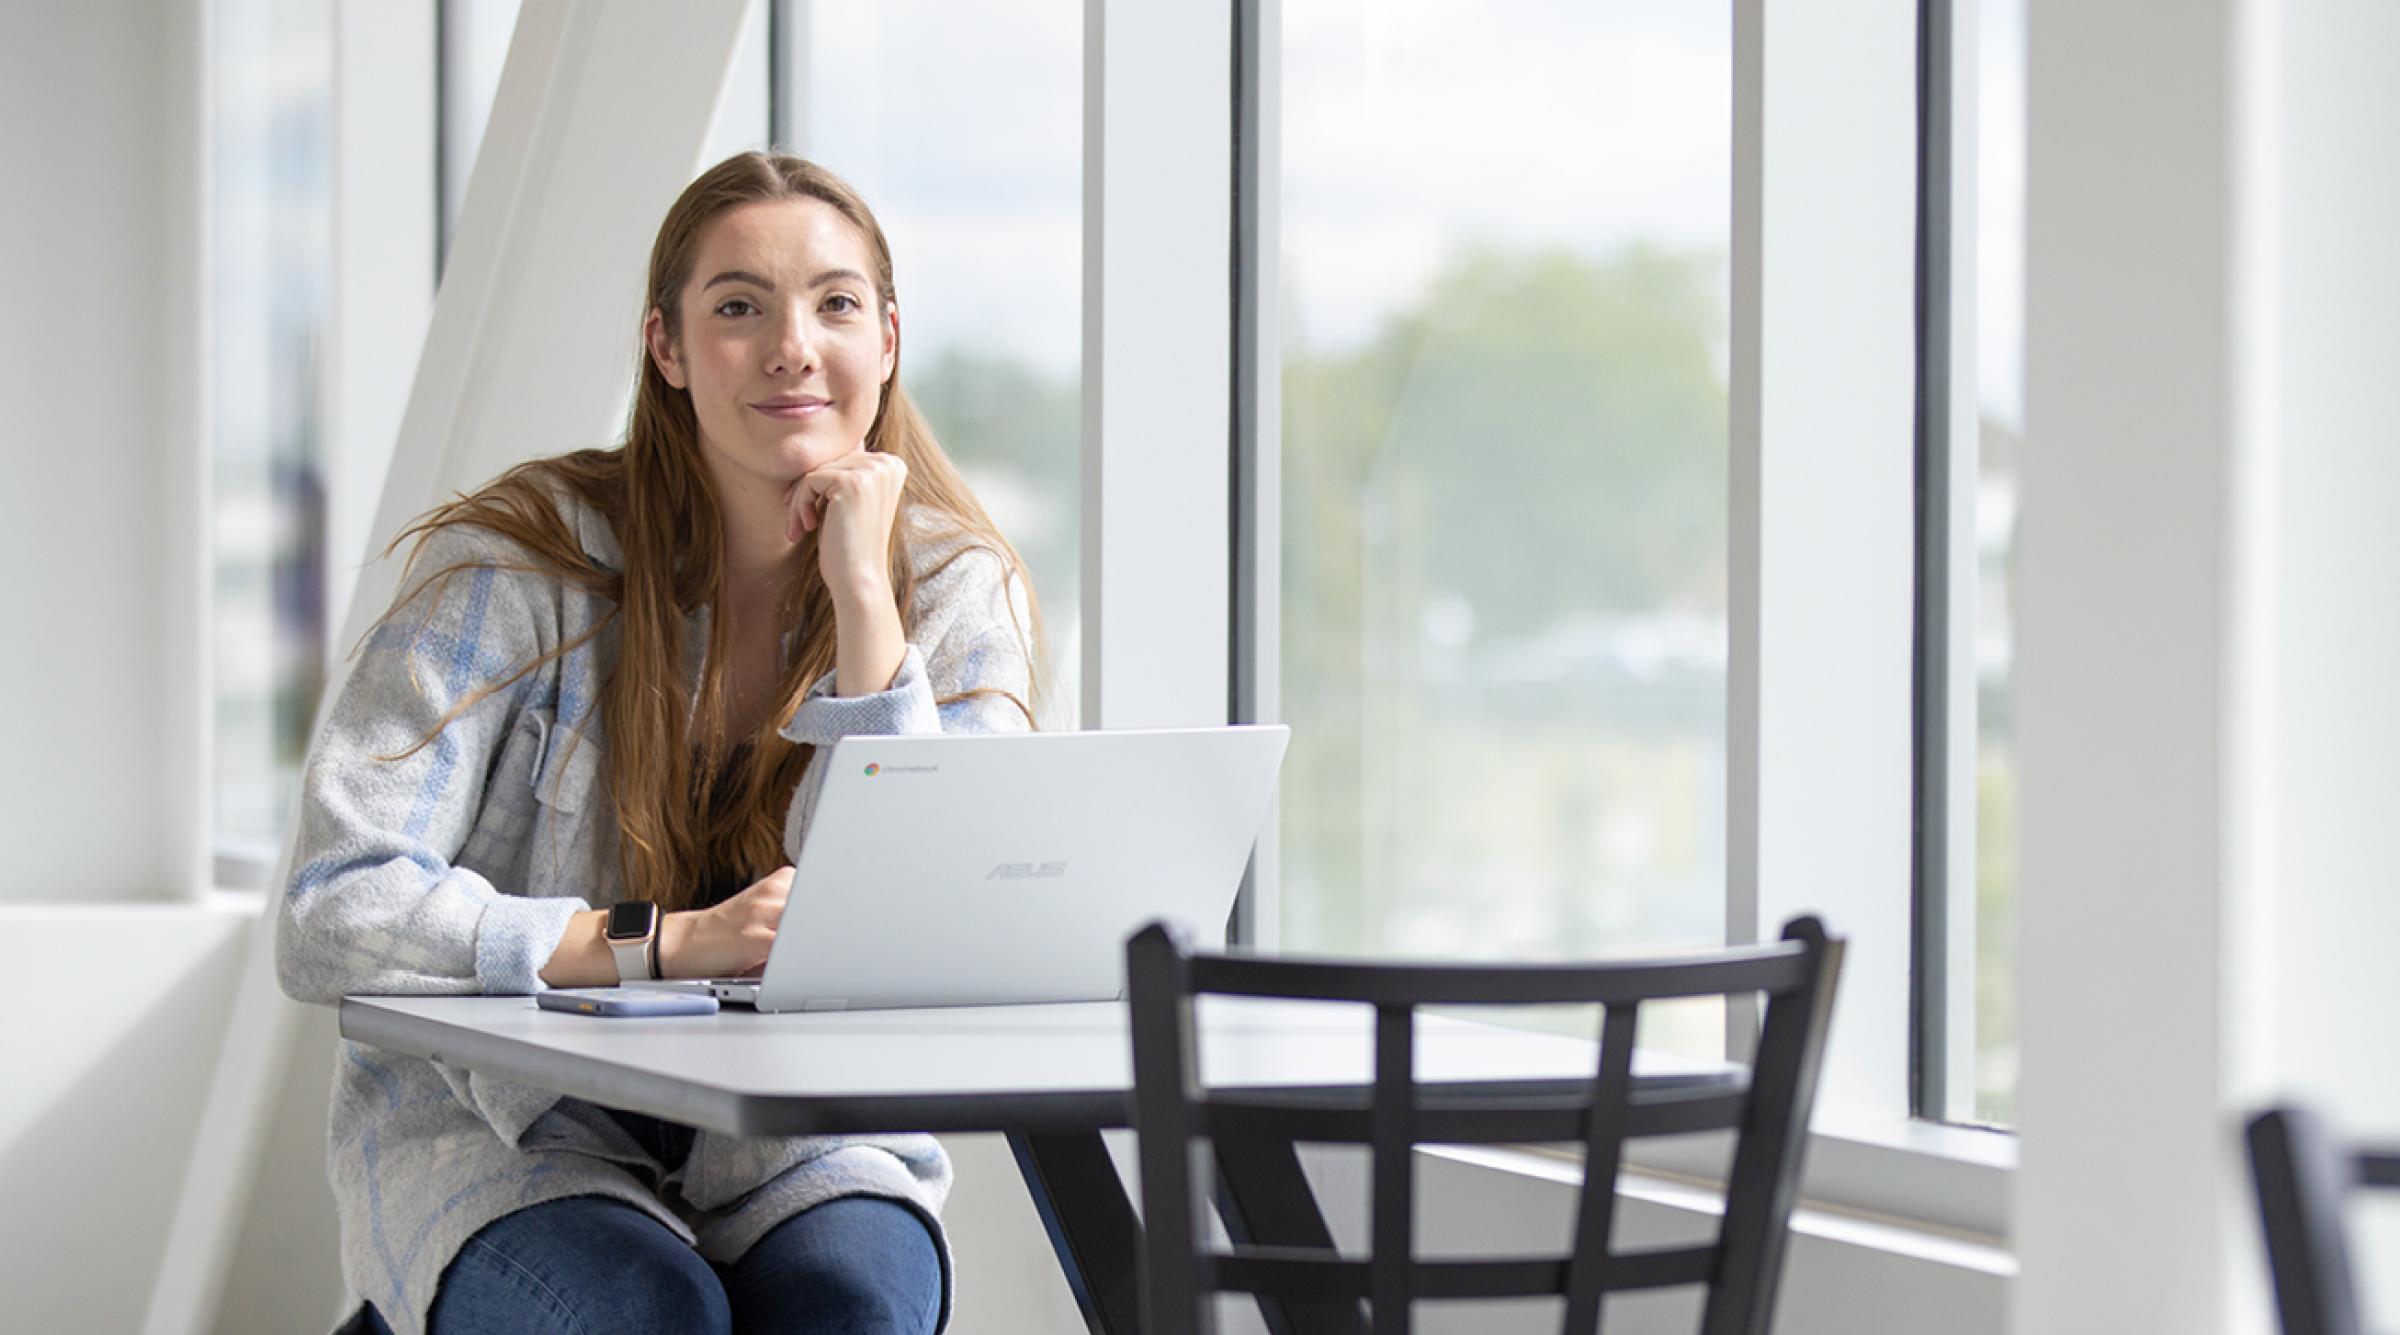 Girl at table on laptop